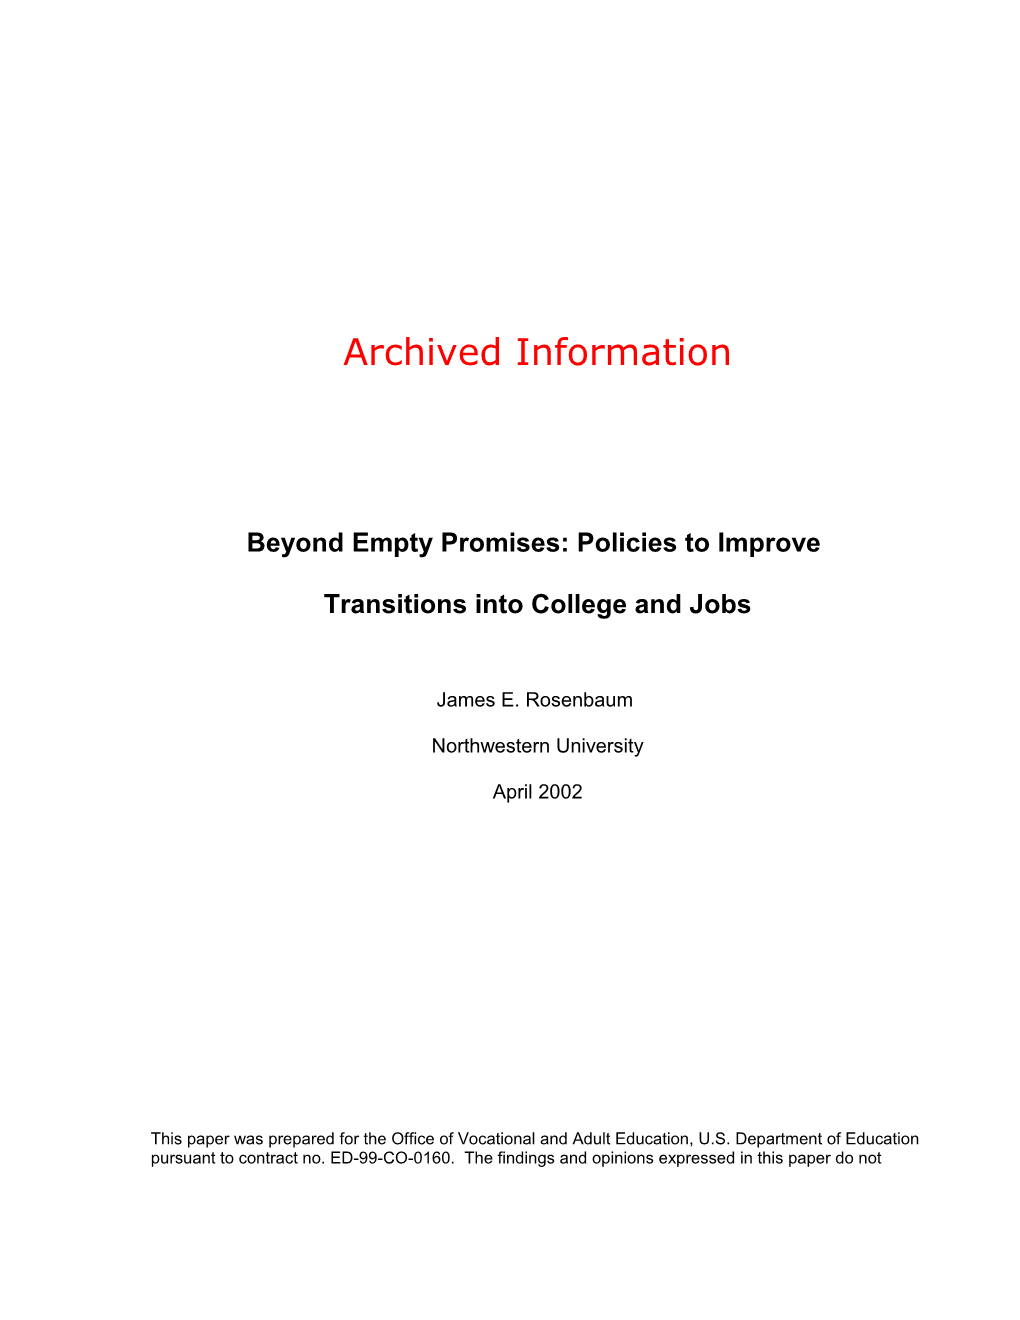 Archived: Beyond Empty Promises: Policies to Improve Transitions Into College and Jobs (MS Word)